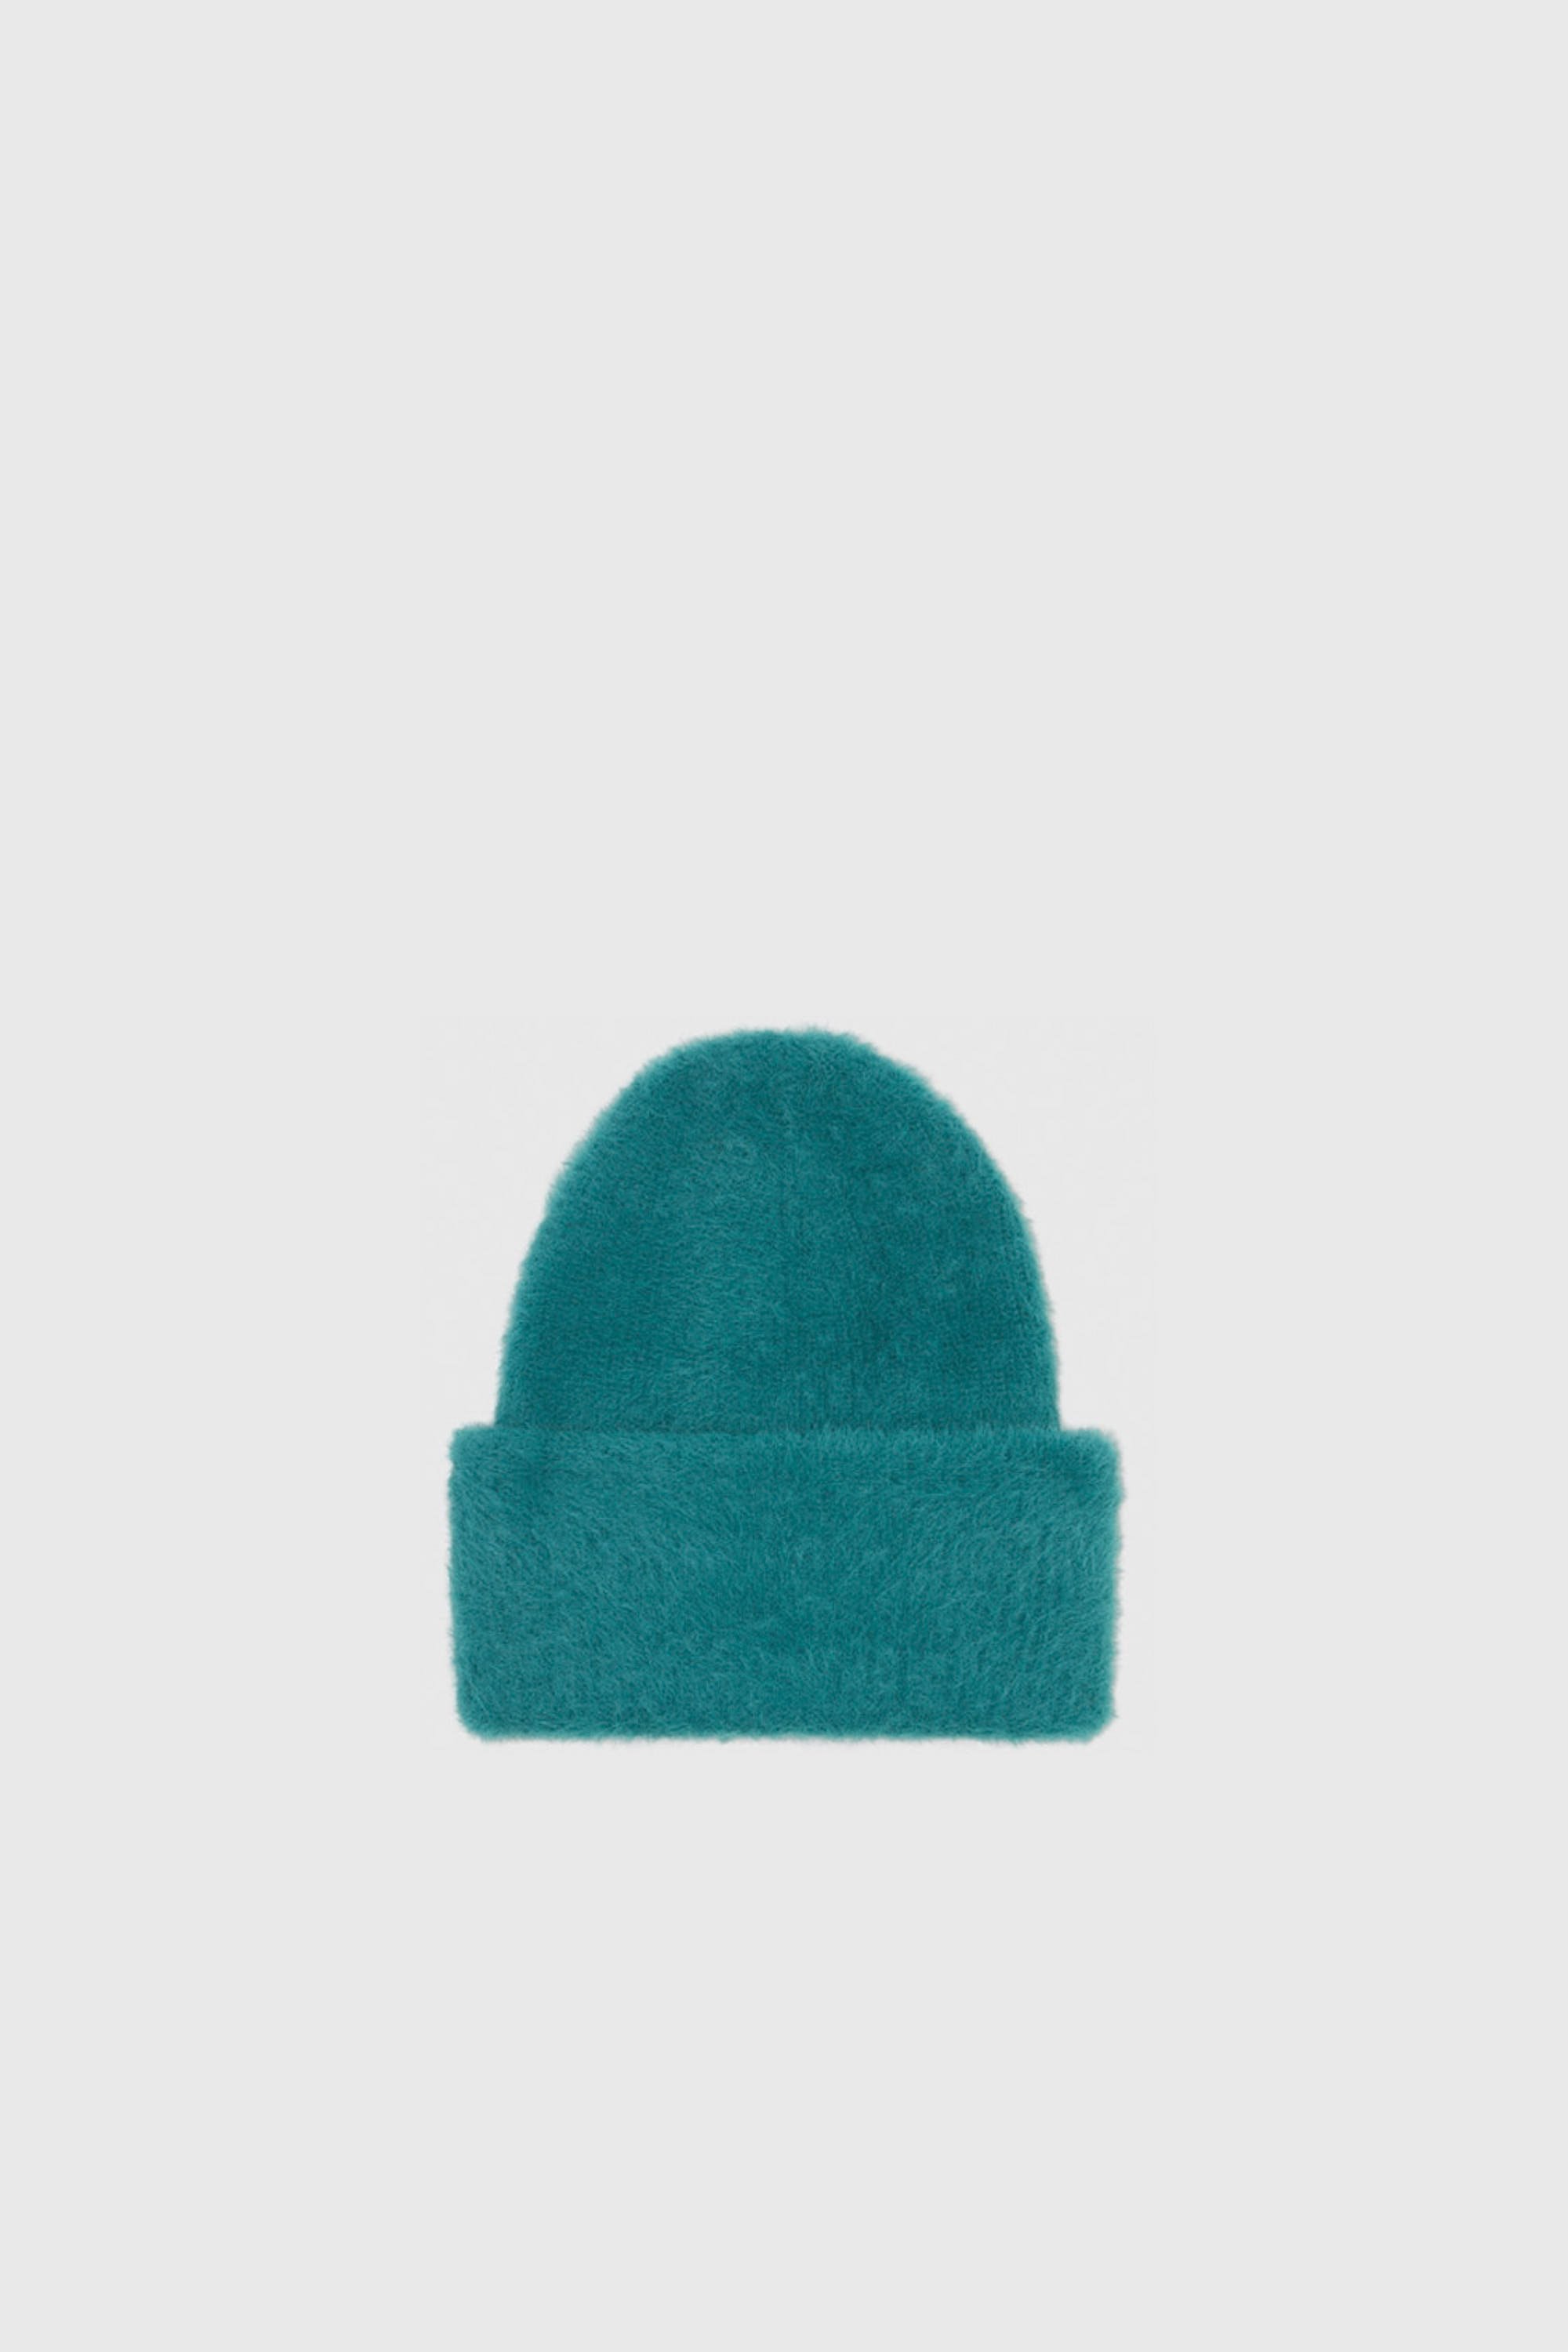 Wood Wood Andre knit beanie Bright green | WoodWood.com